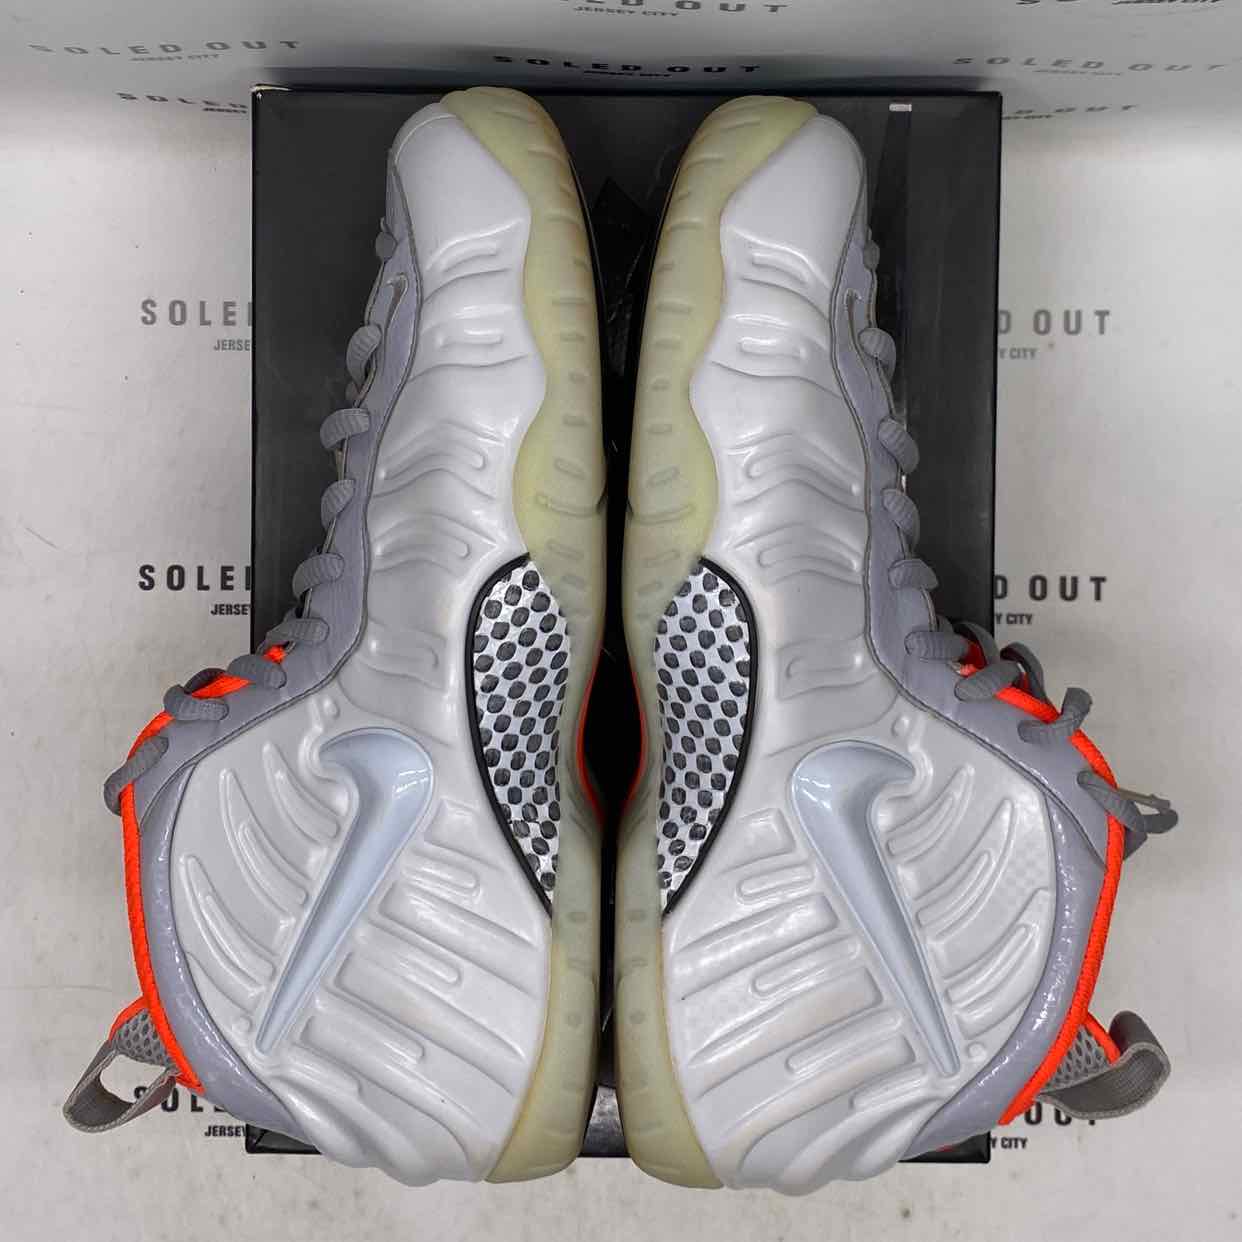 Nike Air Foamposite Pro "Pure Platinum" 2016 Used Size 11.5